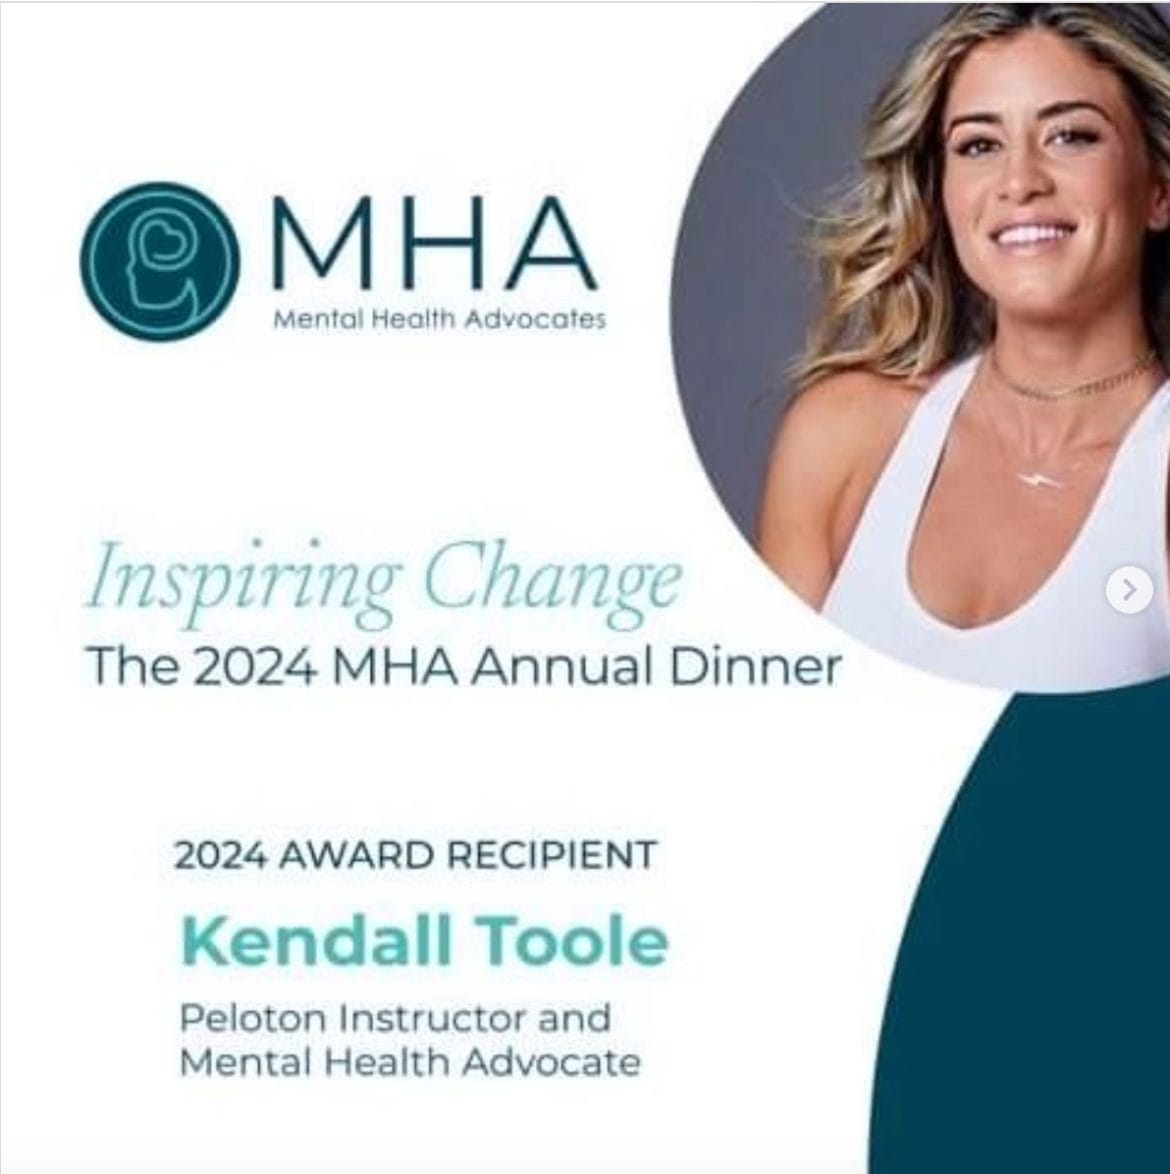 Mental Health Association's Instagram post announcing Kendall Toole is 2024 Advocacy Awardee. Image credit MHA social media.